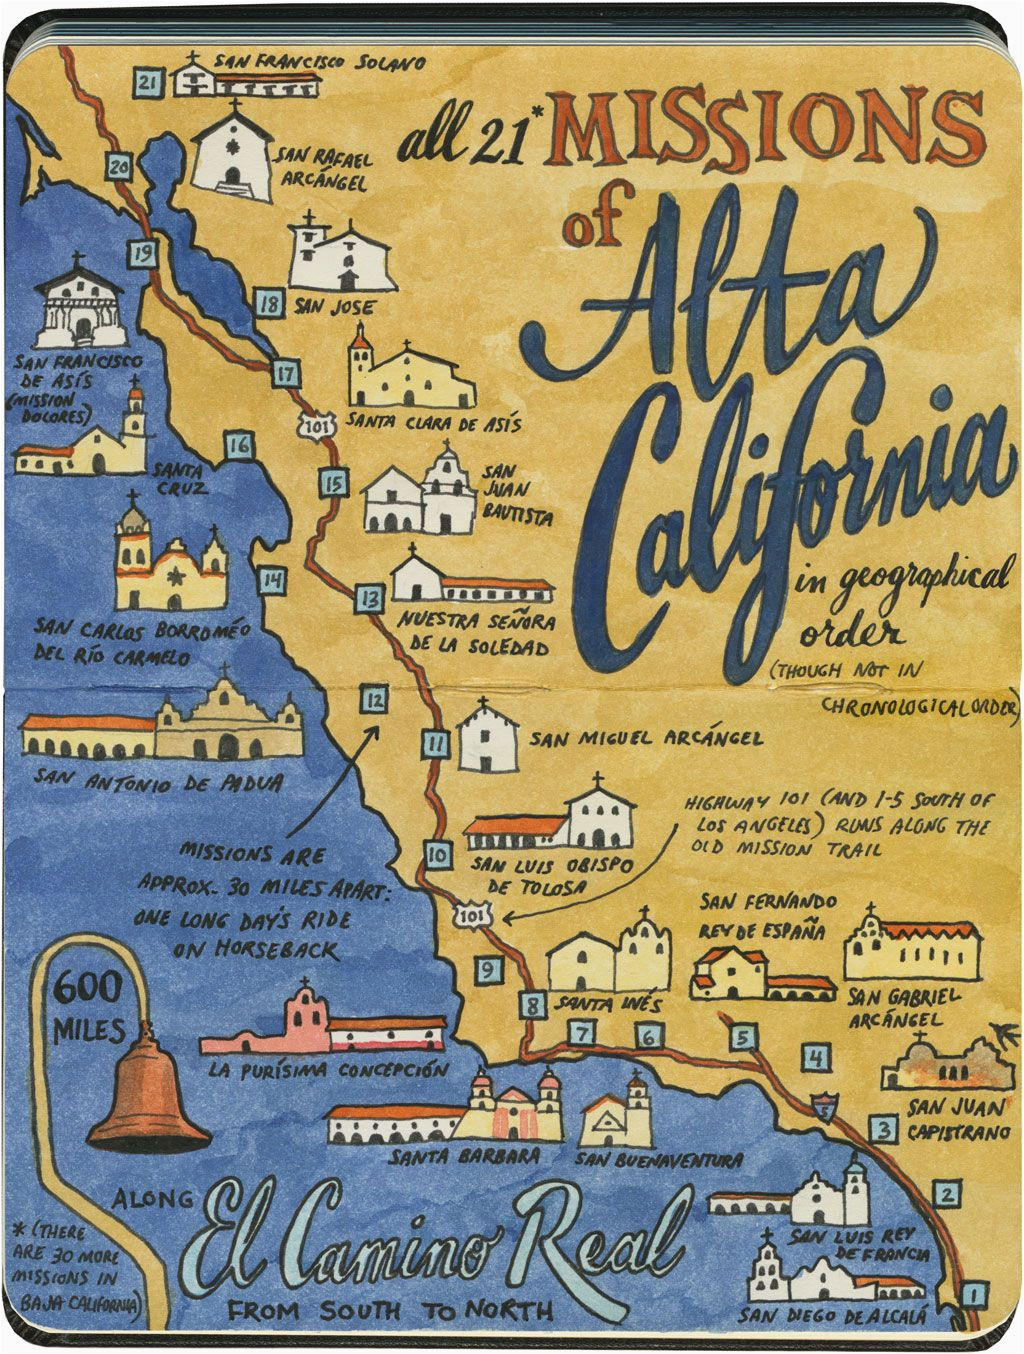 Maps Of California Missions Earlier This Year I Visited All 21 California Missions and Created